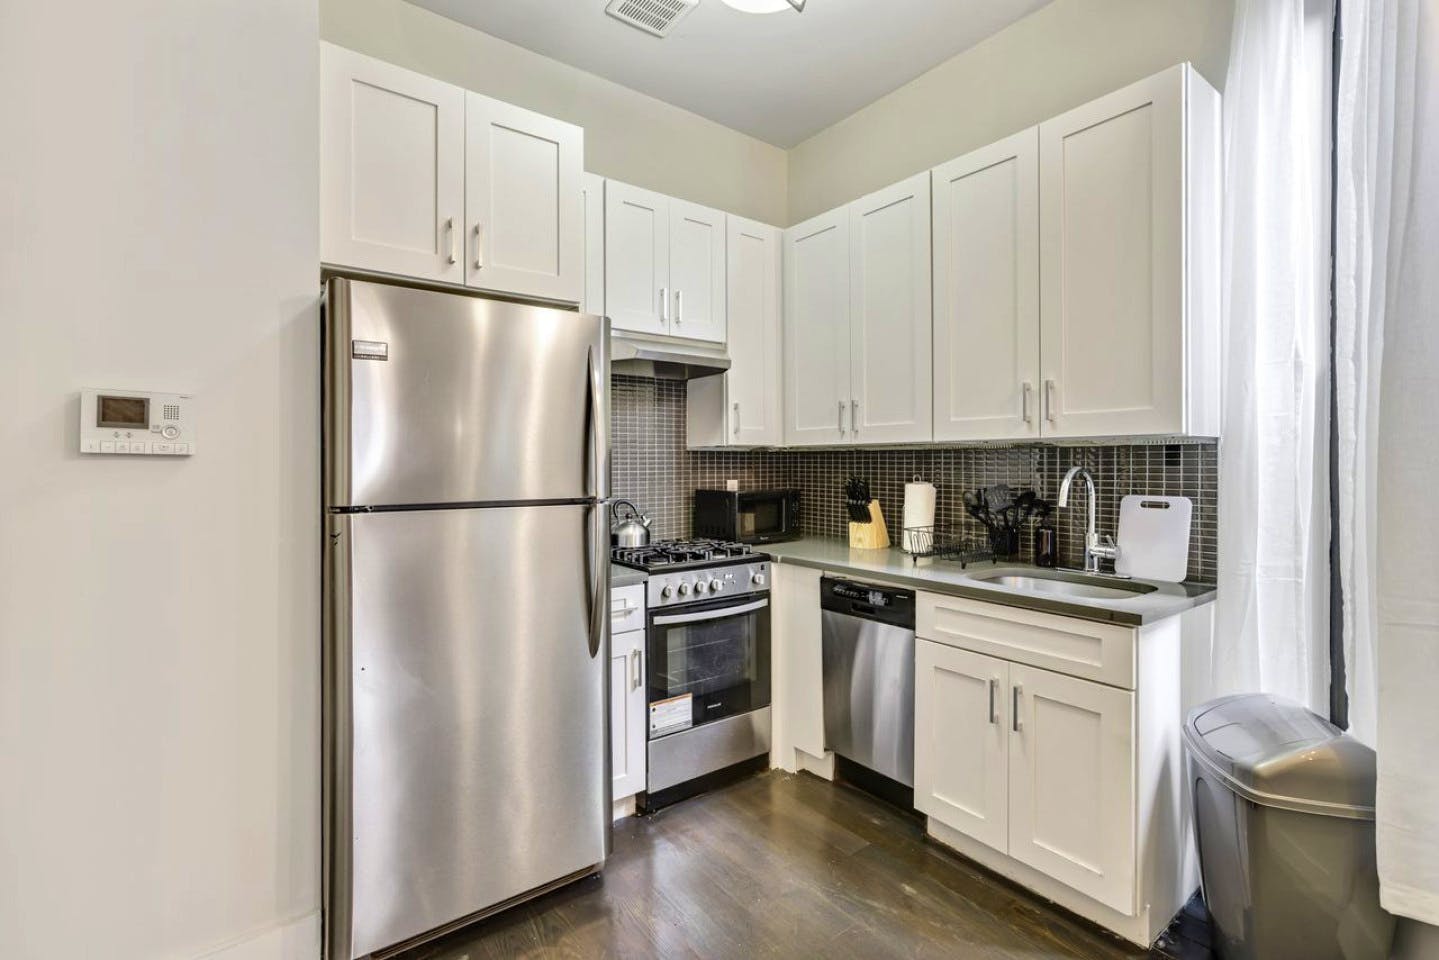 Modern Chic Apt. 2 miles away from Barclays Center